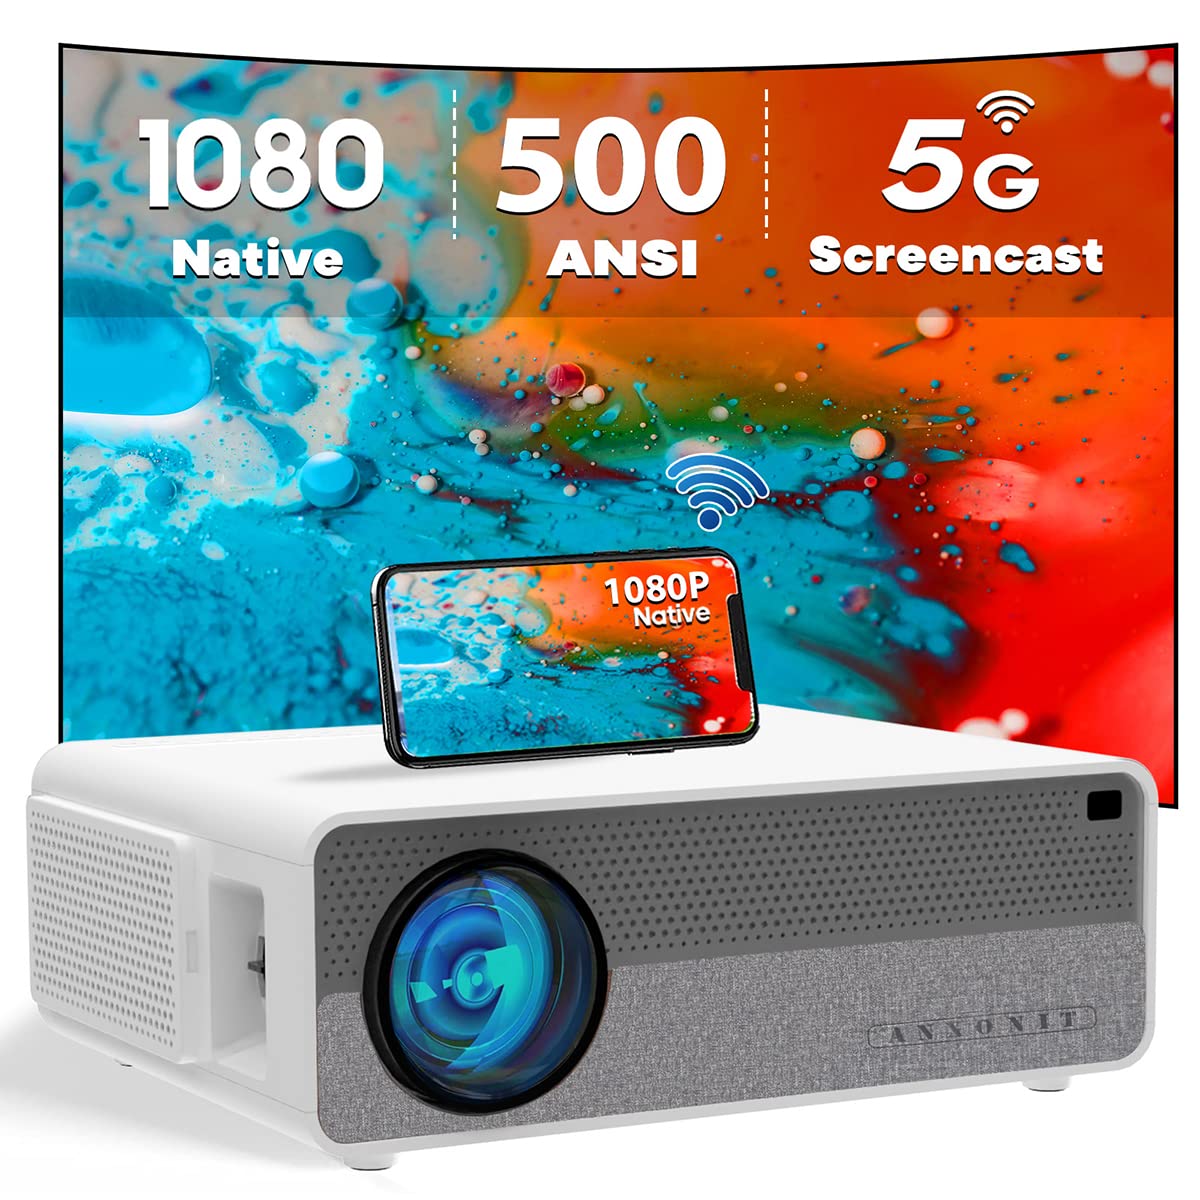 ANXONIT Native 1080P Projector, 500 ANSI Lumens FHD Video Projector, 5G WiFi Screencast, Dual 8W Speakers with Bluetooth, 300